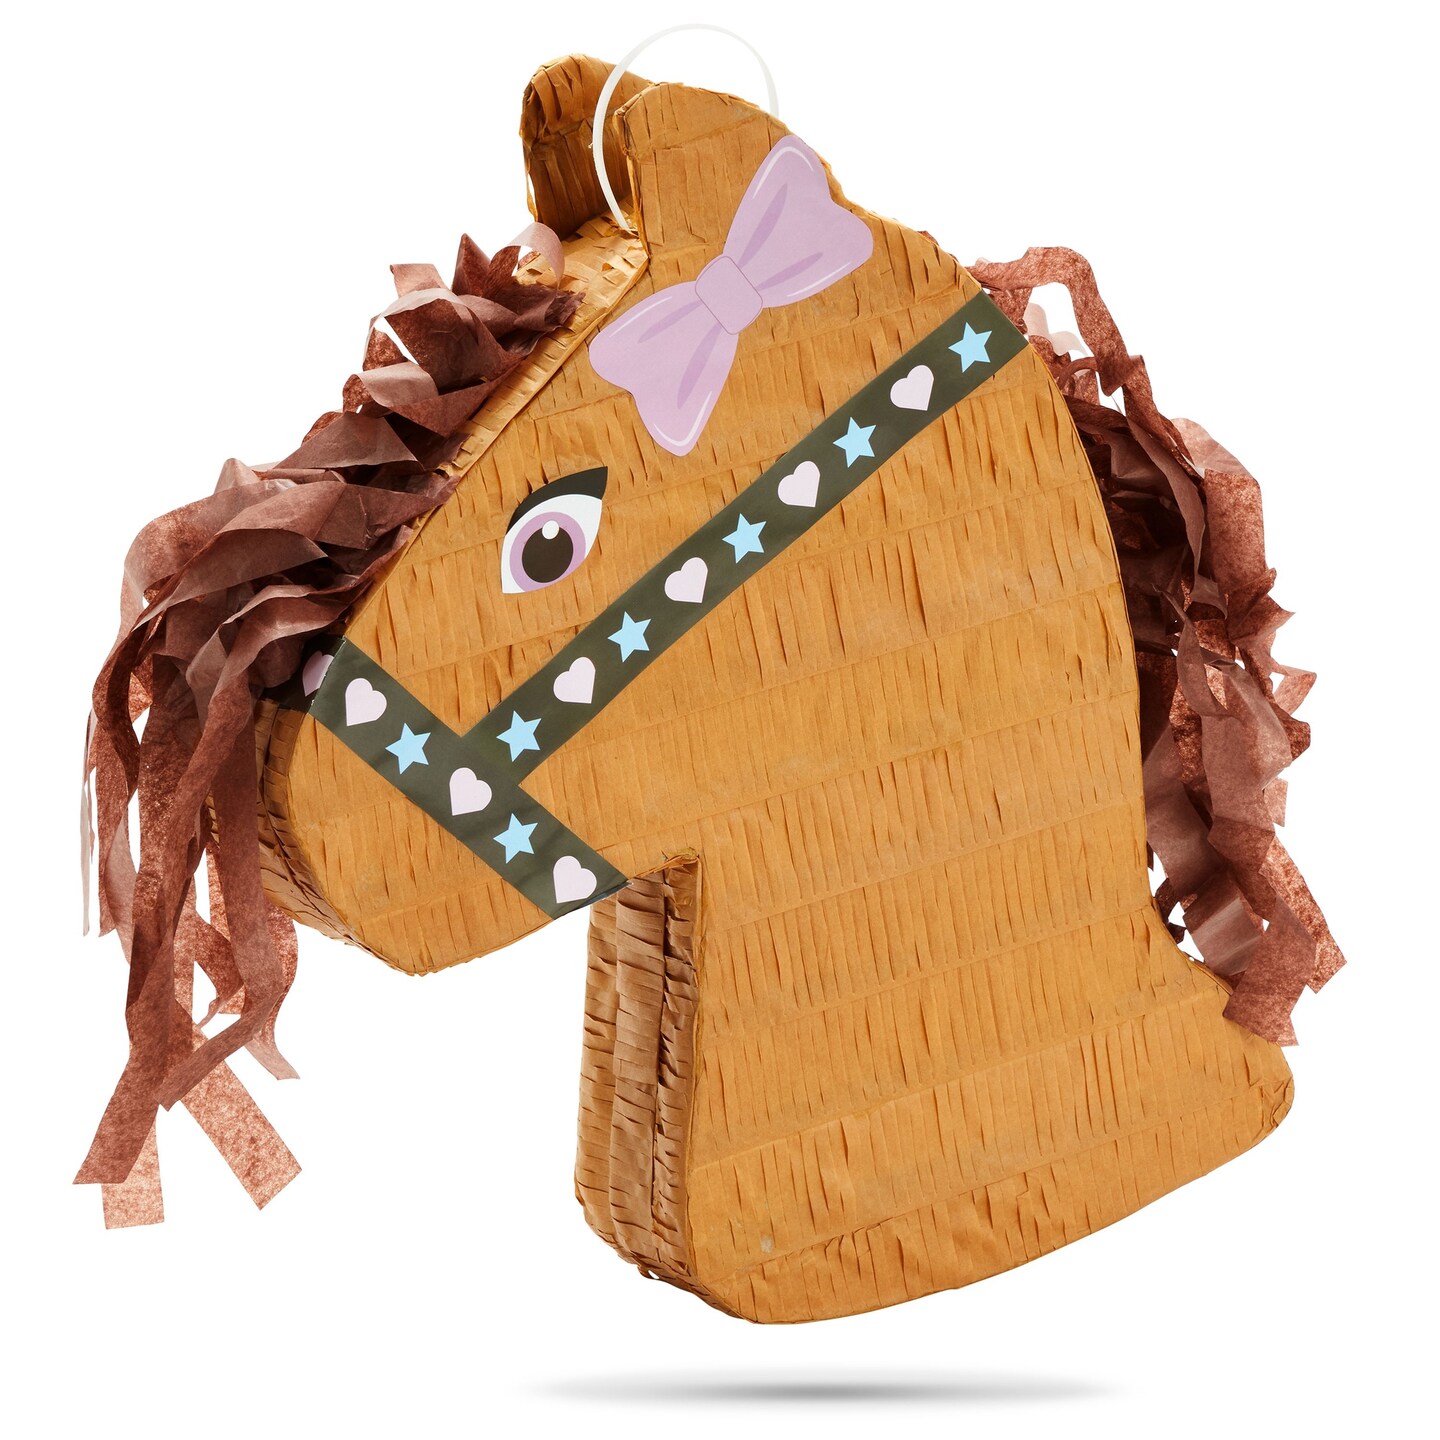 Pony Design Pinata for Horse Themed Cowgirl Birthday Party Supplies, Small (12x16x3 in)